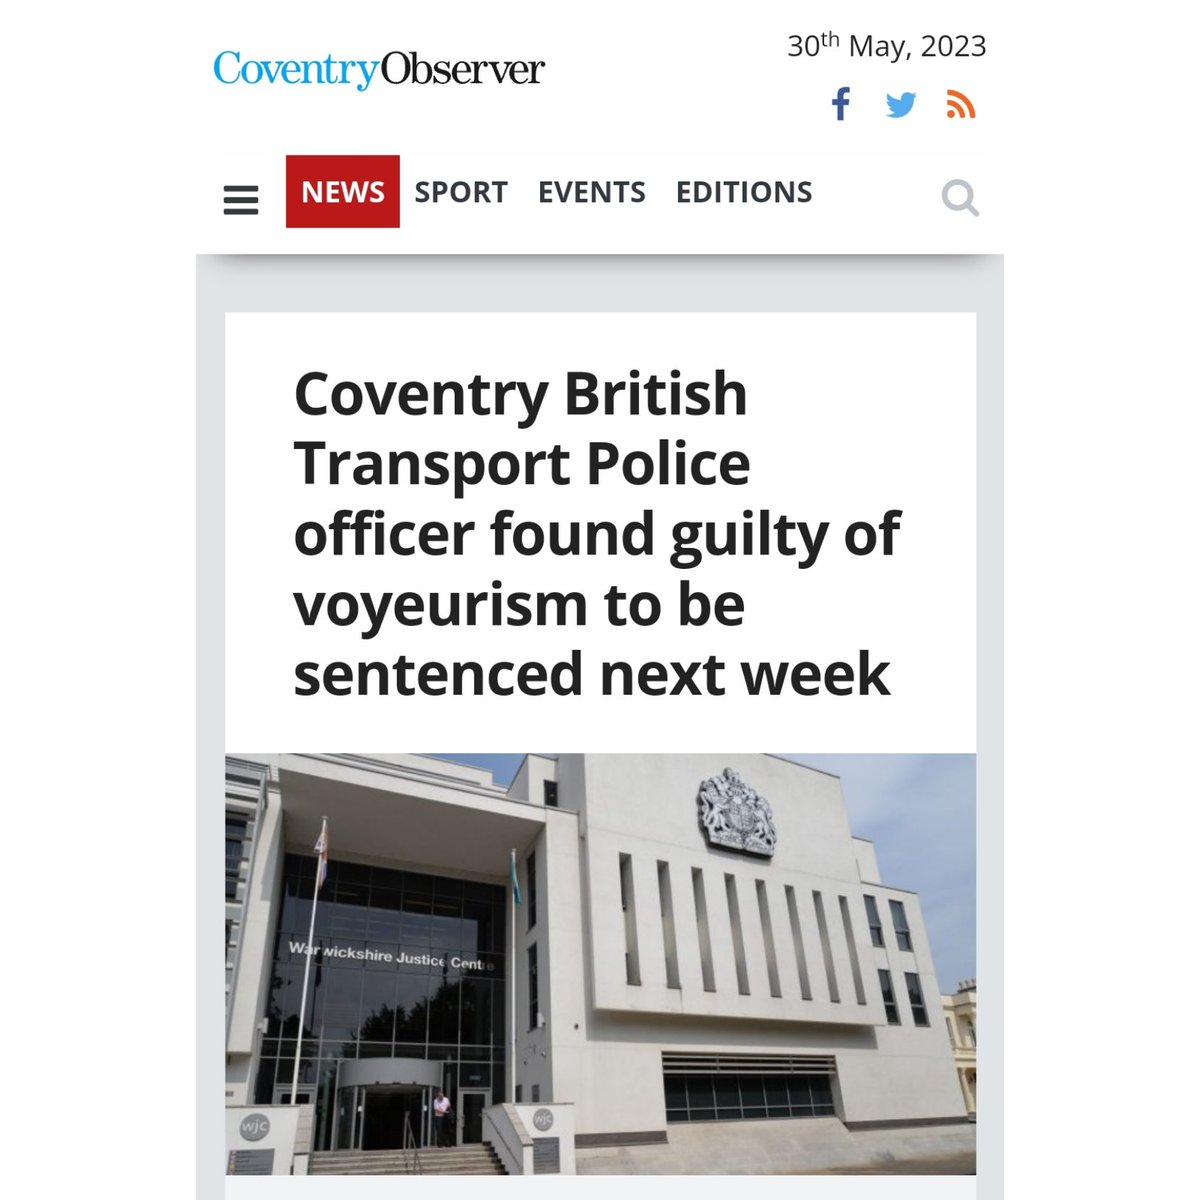 Coventry British Transport Police officer found guilty of voyeurism to be sentenced next week.

coventryobserver.co.uk/news/coventry-…

#Coventry #BritishTransportPolice #Voyeurism #ACAB